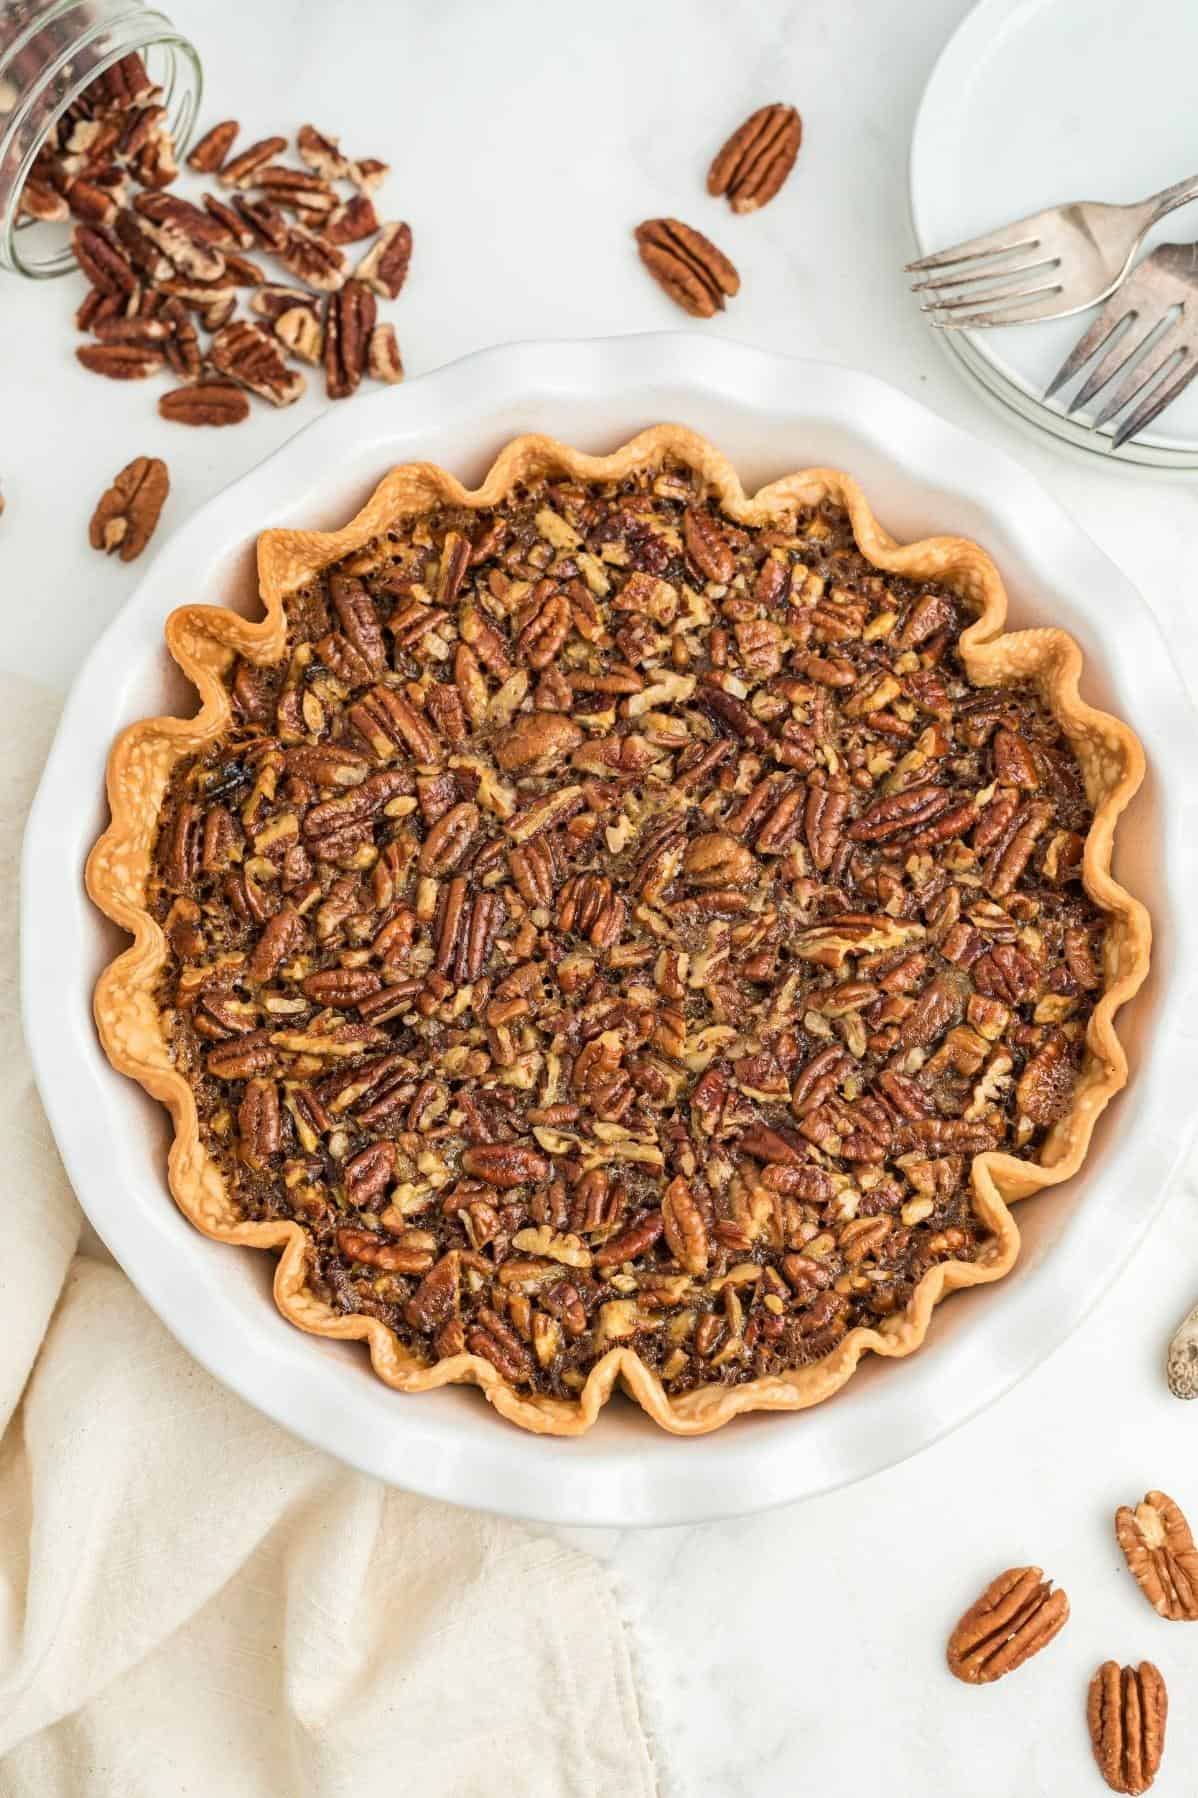  A beautifully golden brown crust with a delectable filling of pecans and molasses - this is a pie you simply can't resist.